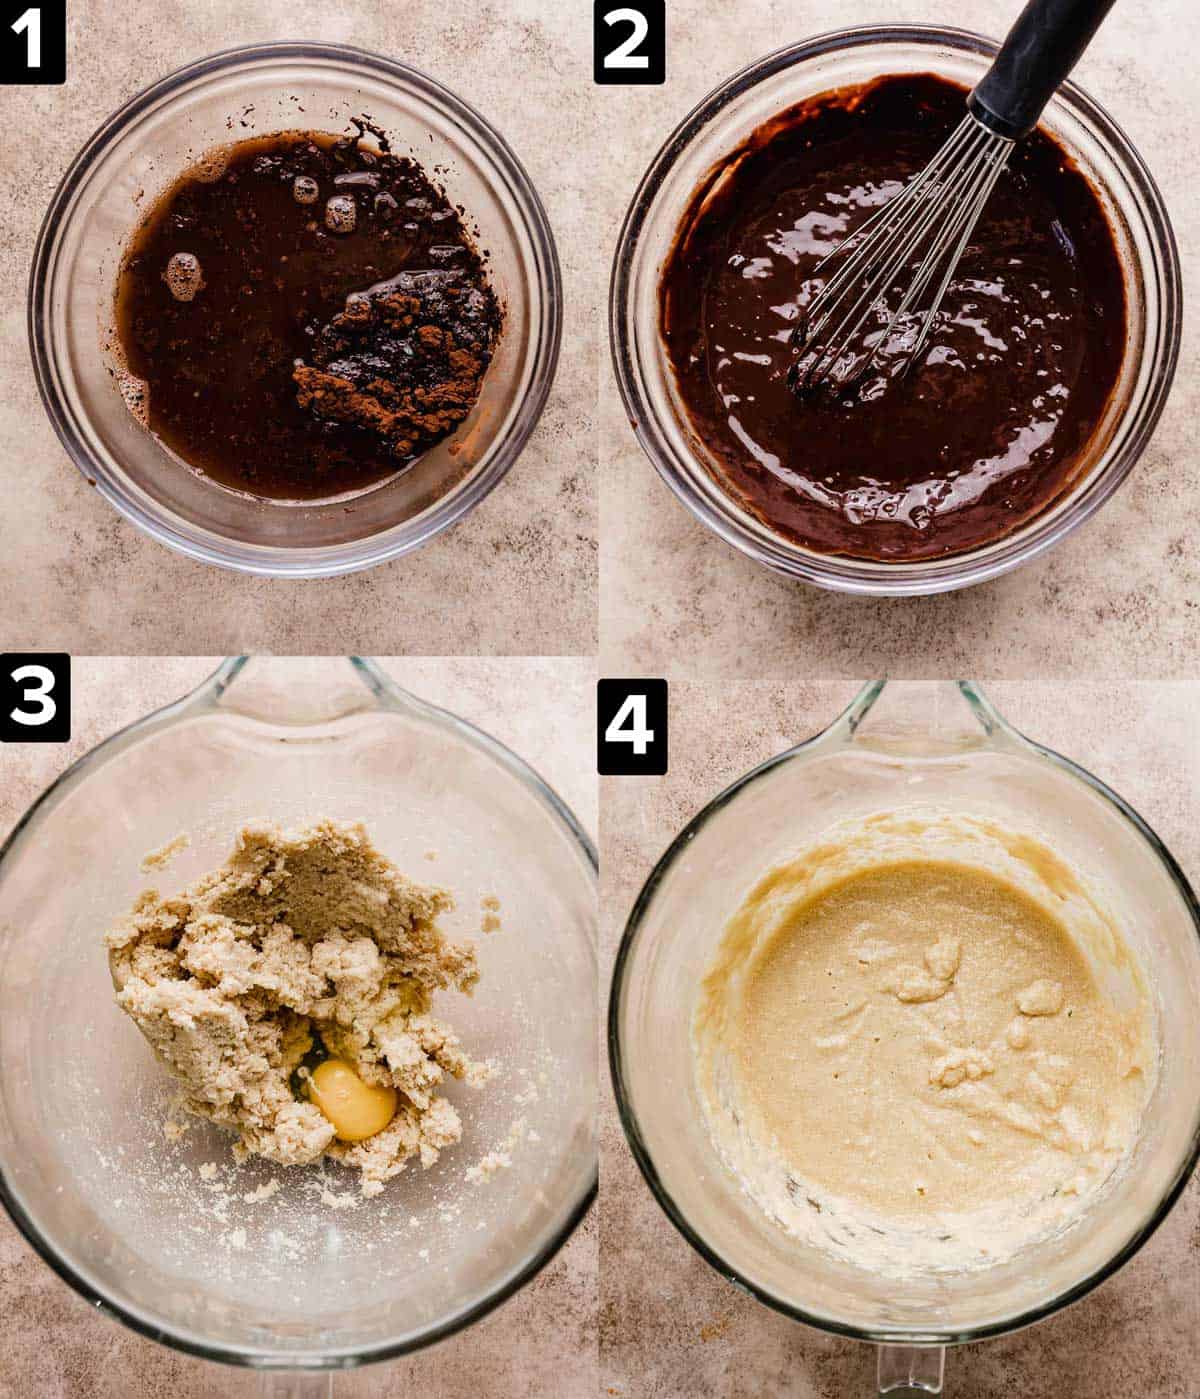 Top left photo is glass bowl with hot water, chopped chocolate and cocoa. Top right photo is a whisk stirring a melted chocolate mixture. Bottom left photo is creamed sugar and butter with an egg. Bottom right photo is a light yellow mixture in glass bowl.